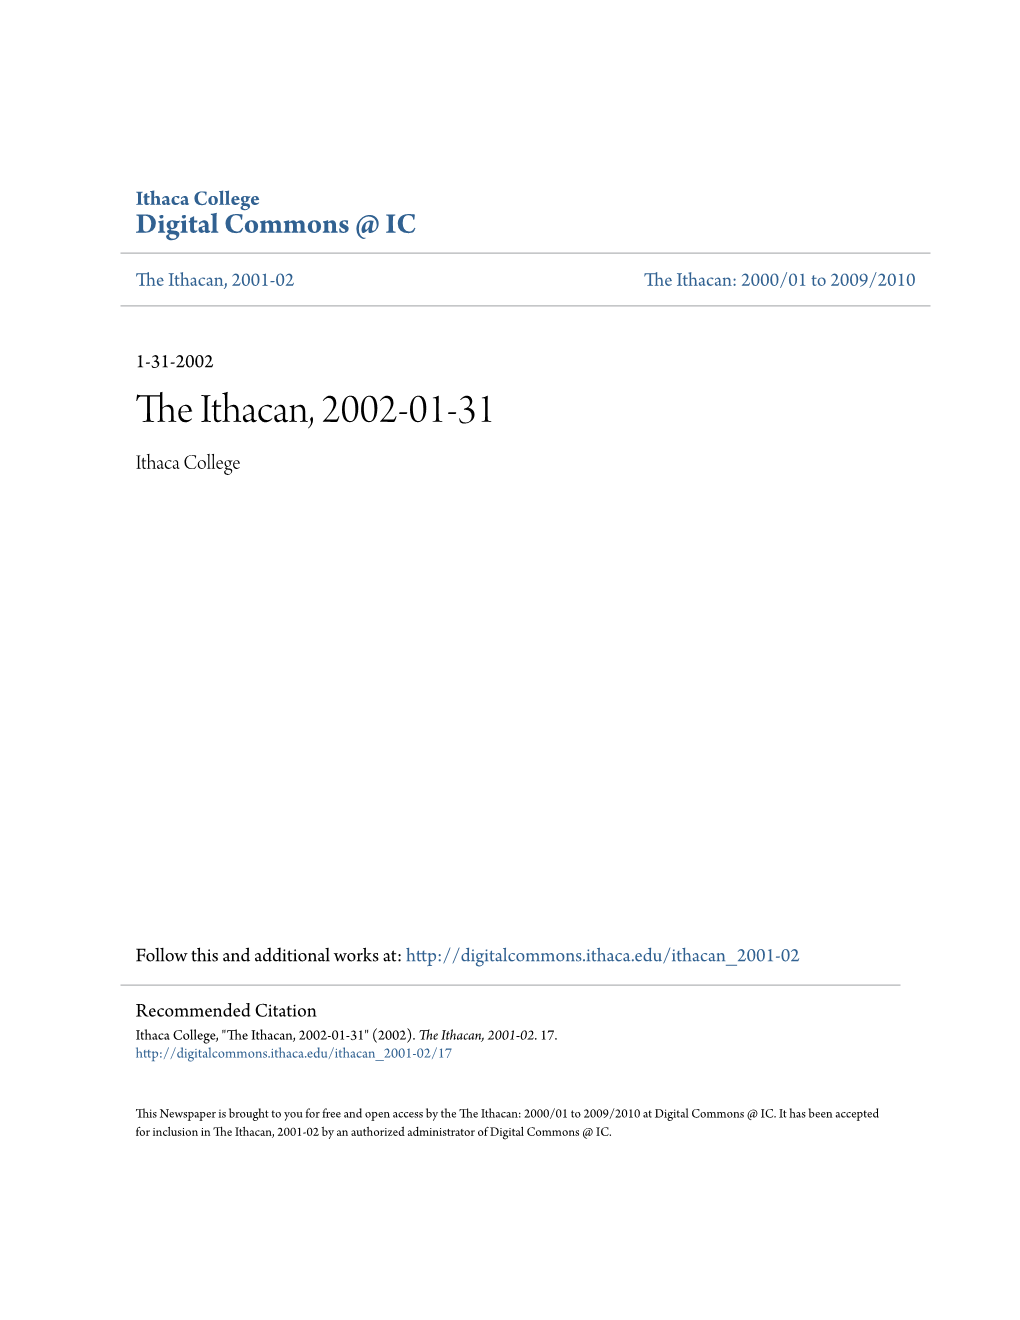 The Ithacan, 2002-01-31